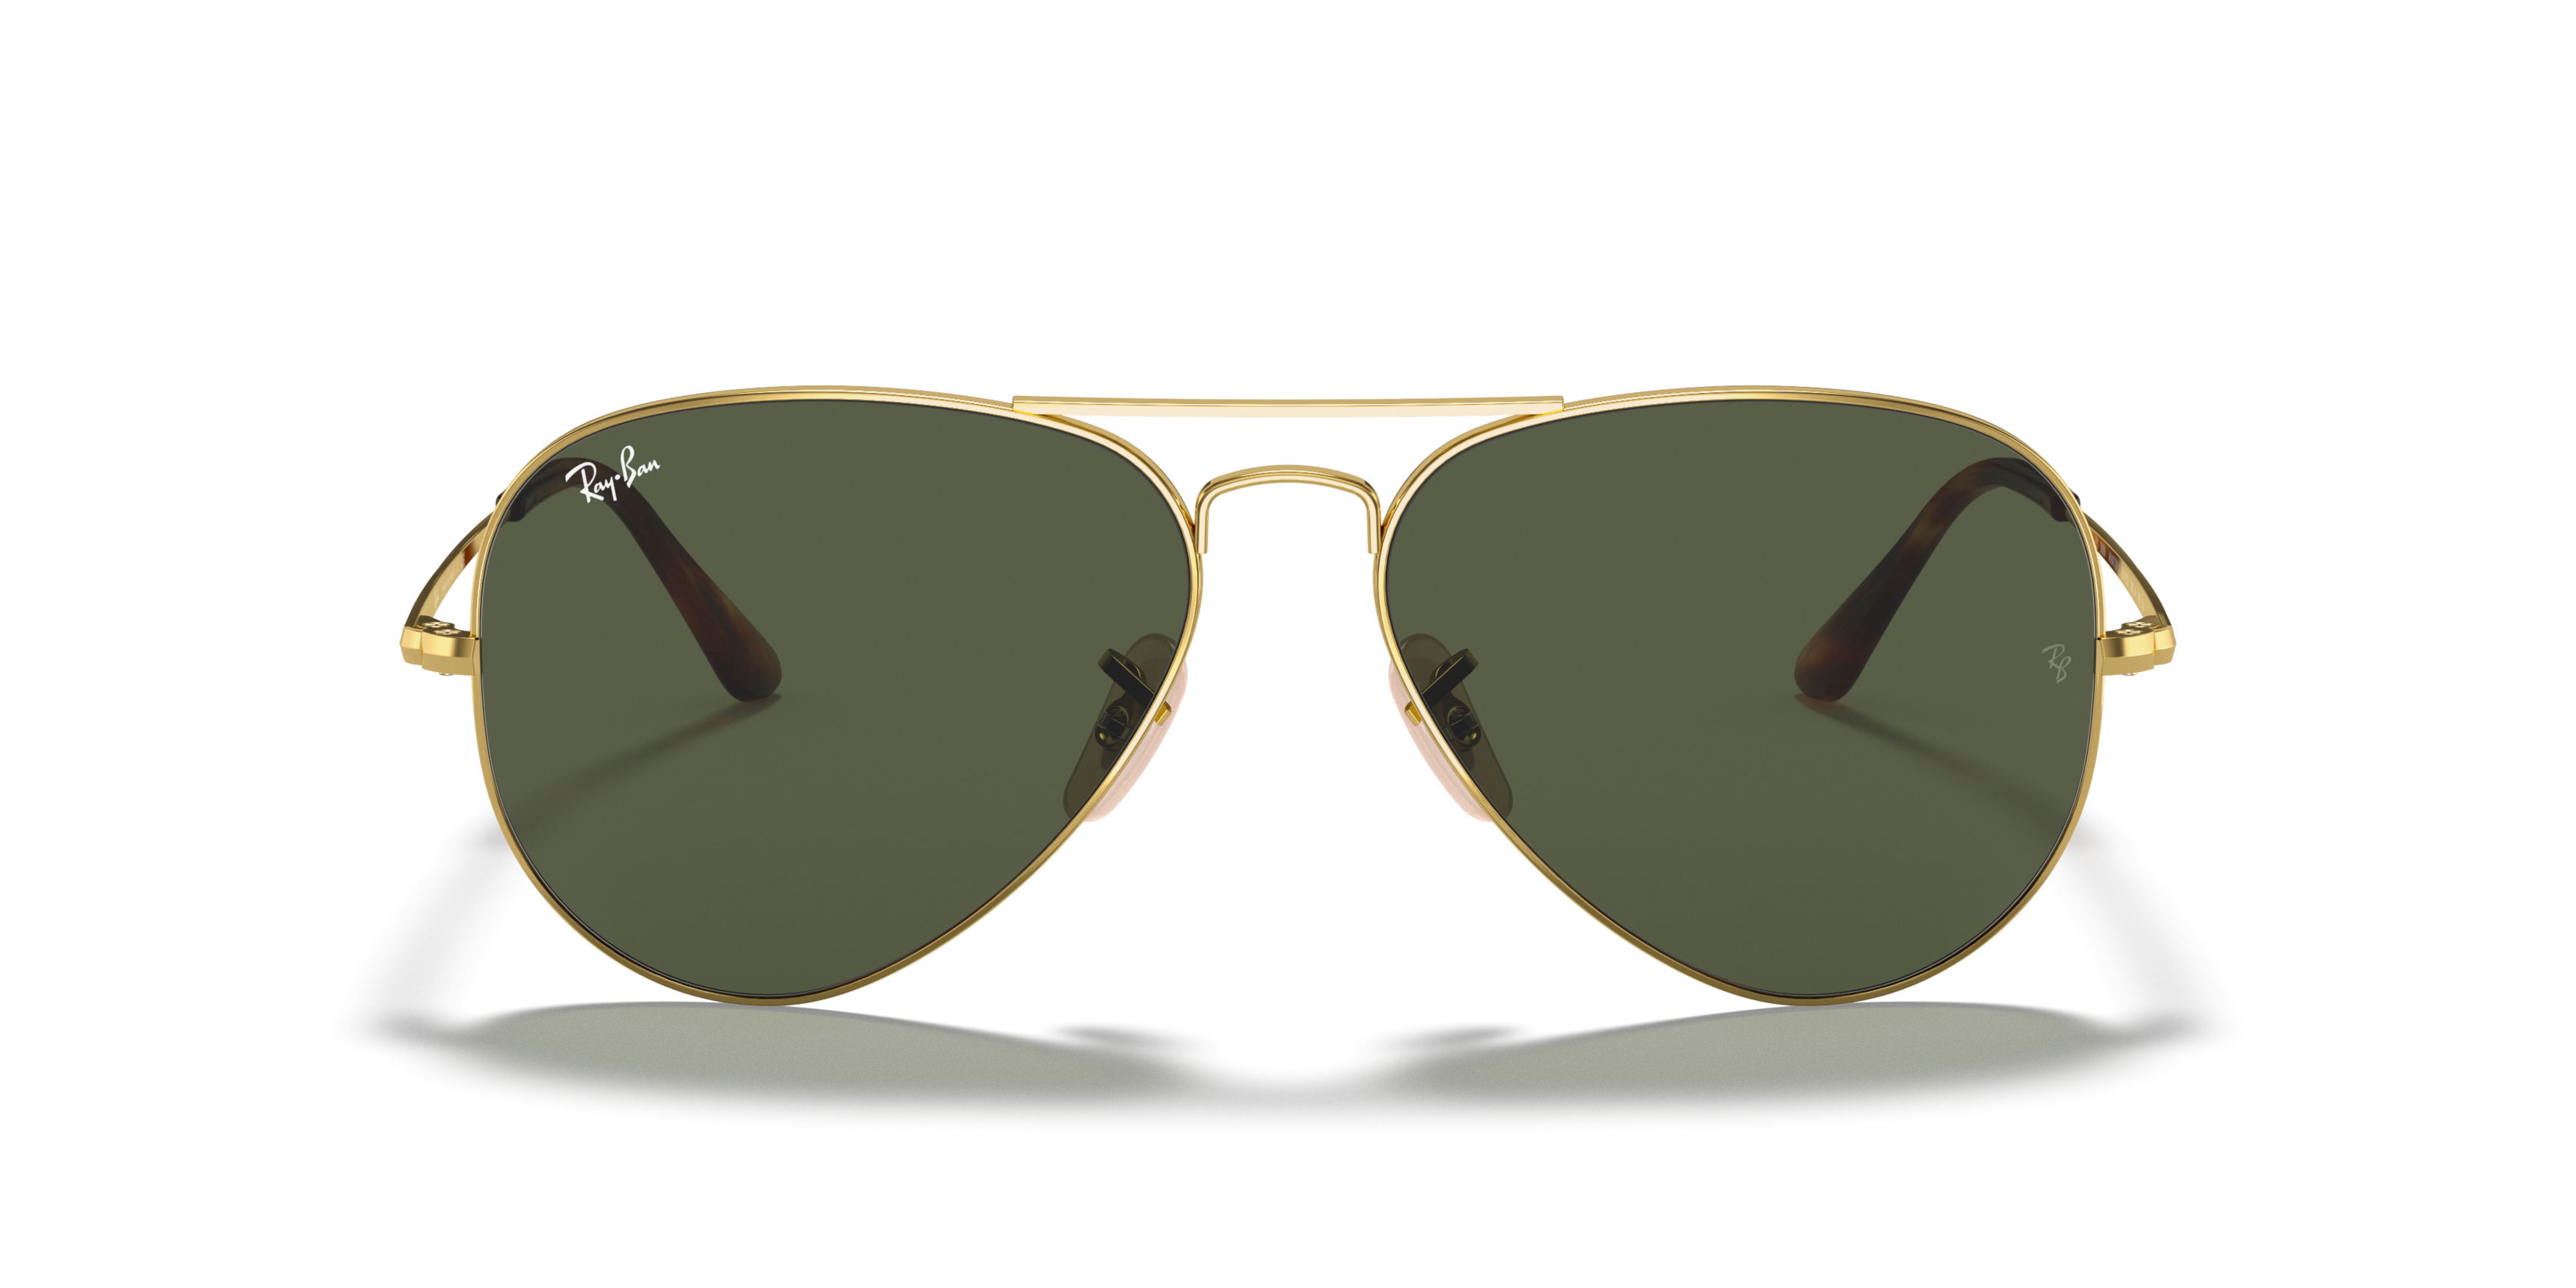 [products.image.front] Ray-Ban Aviator Metal II RB3689 914731